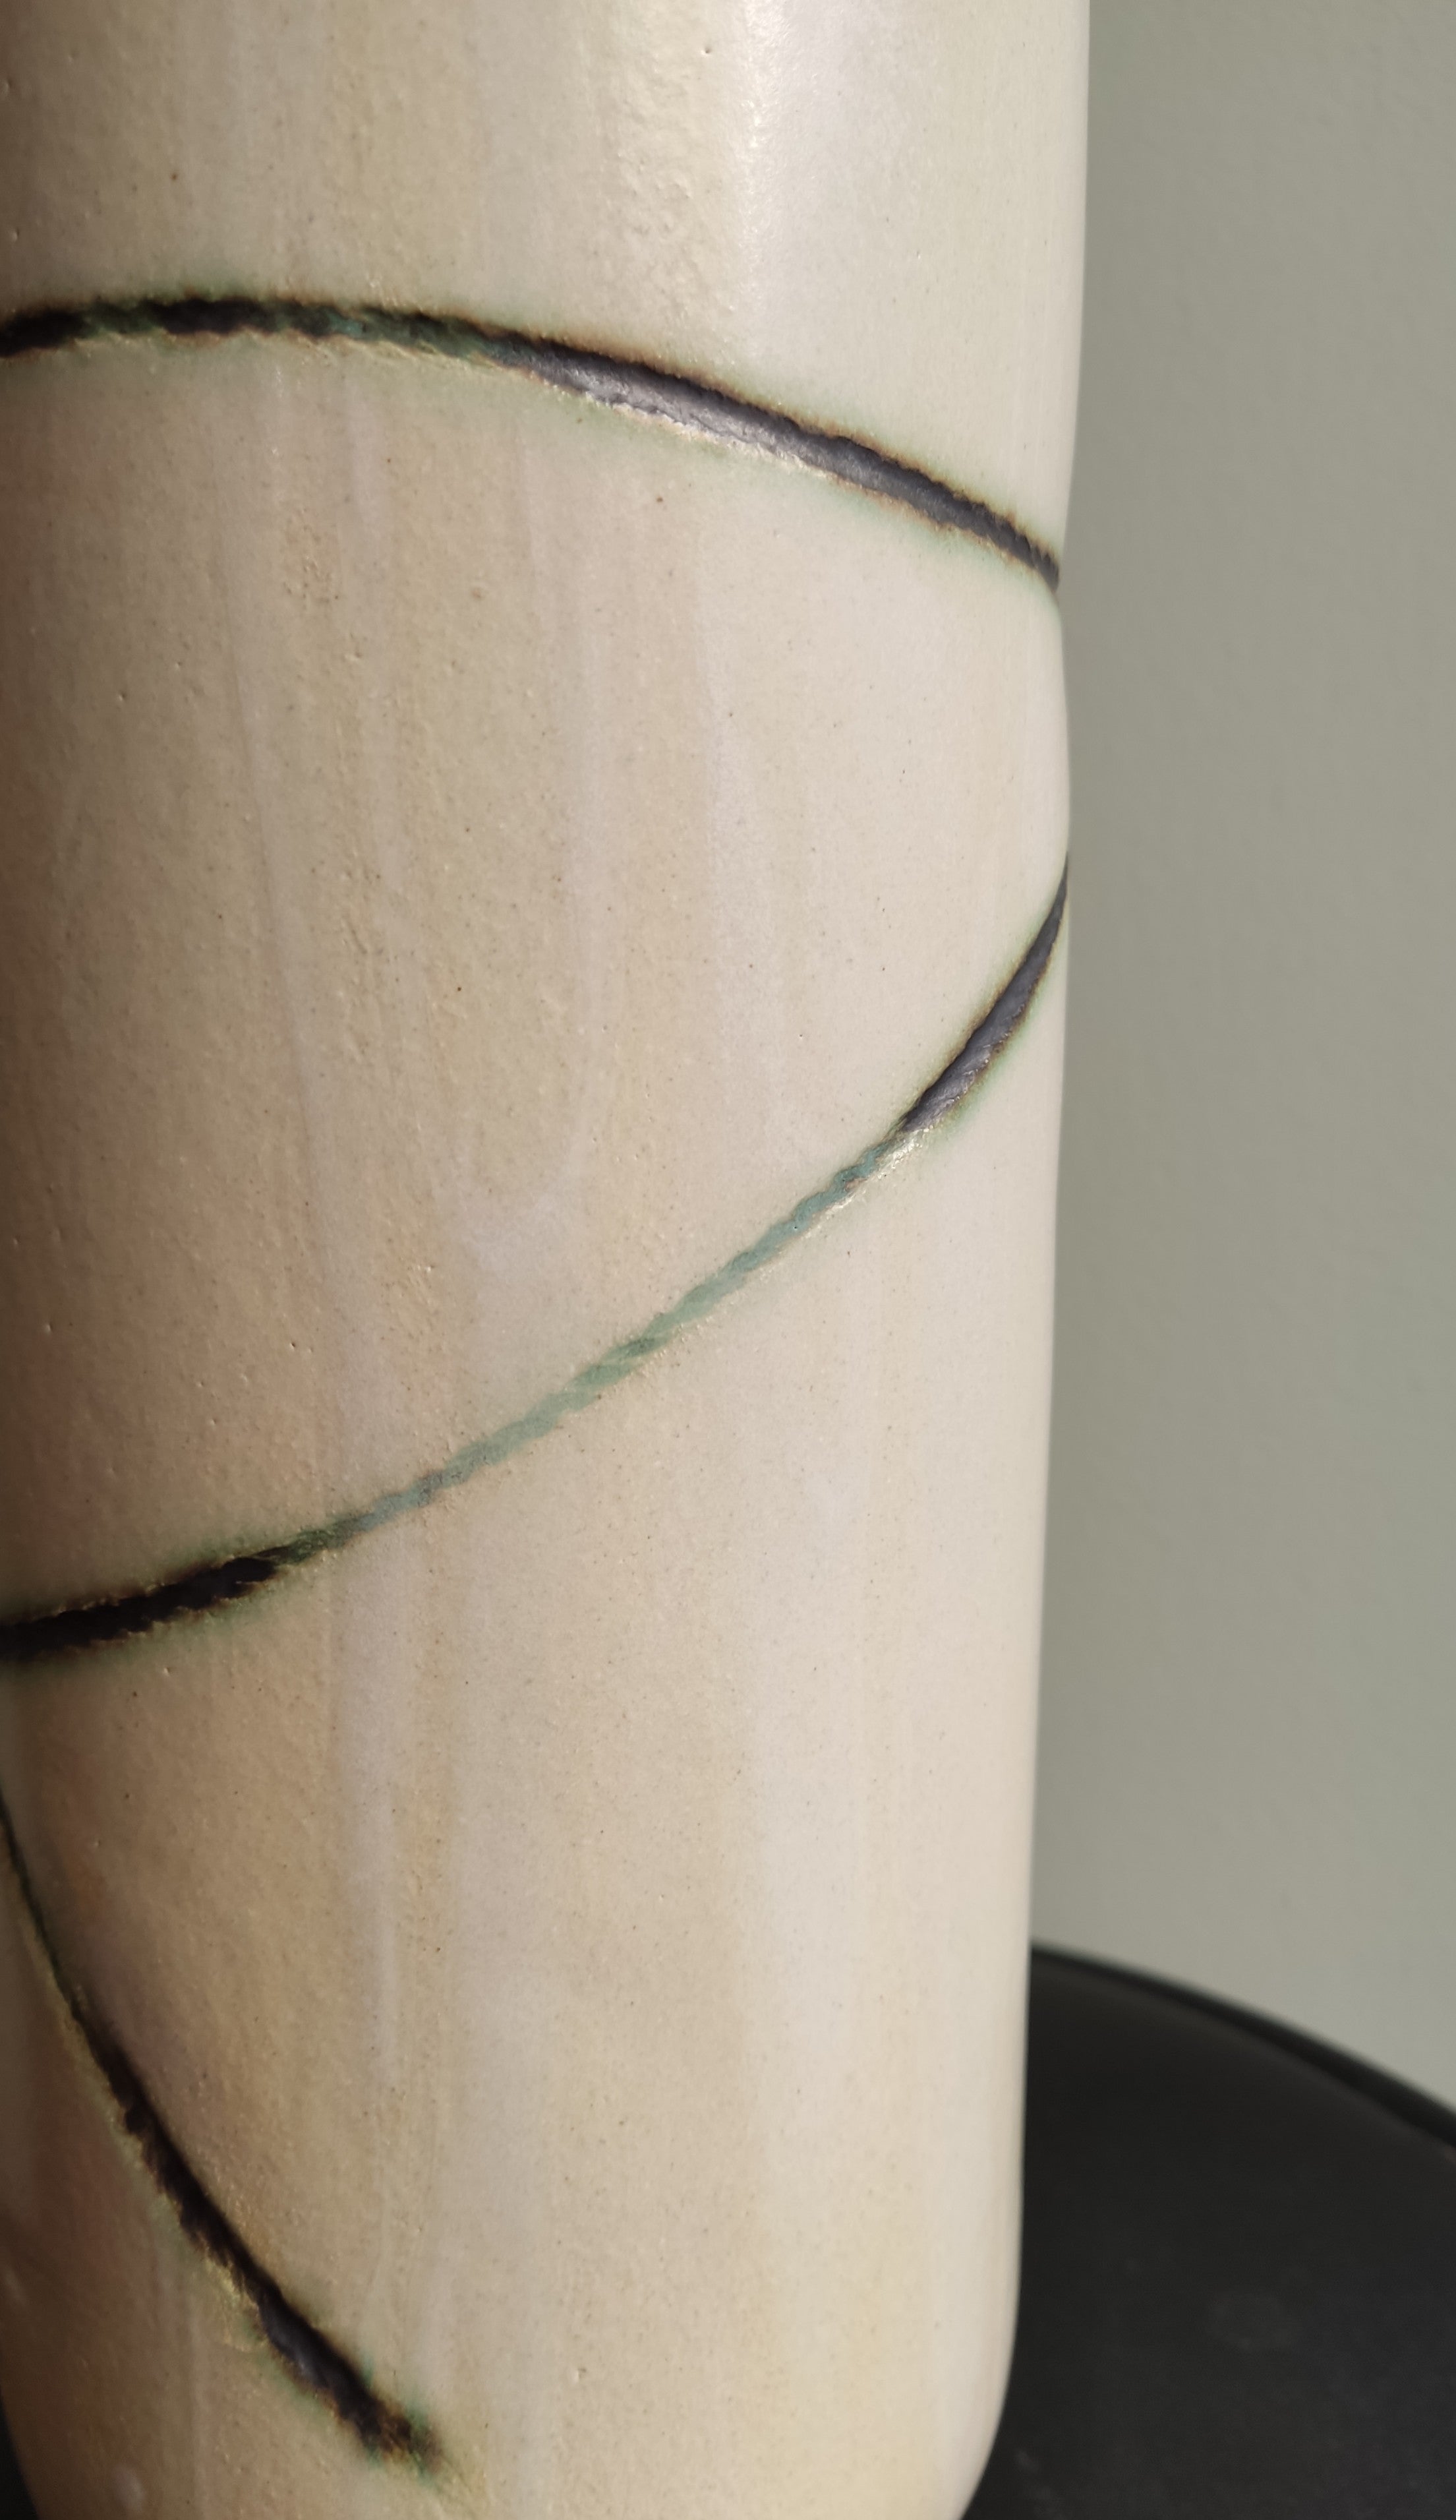 White vase with green texture